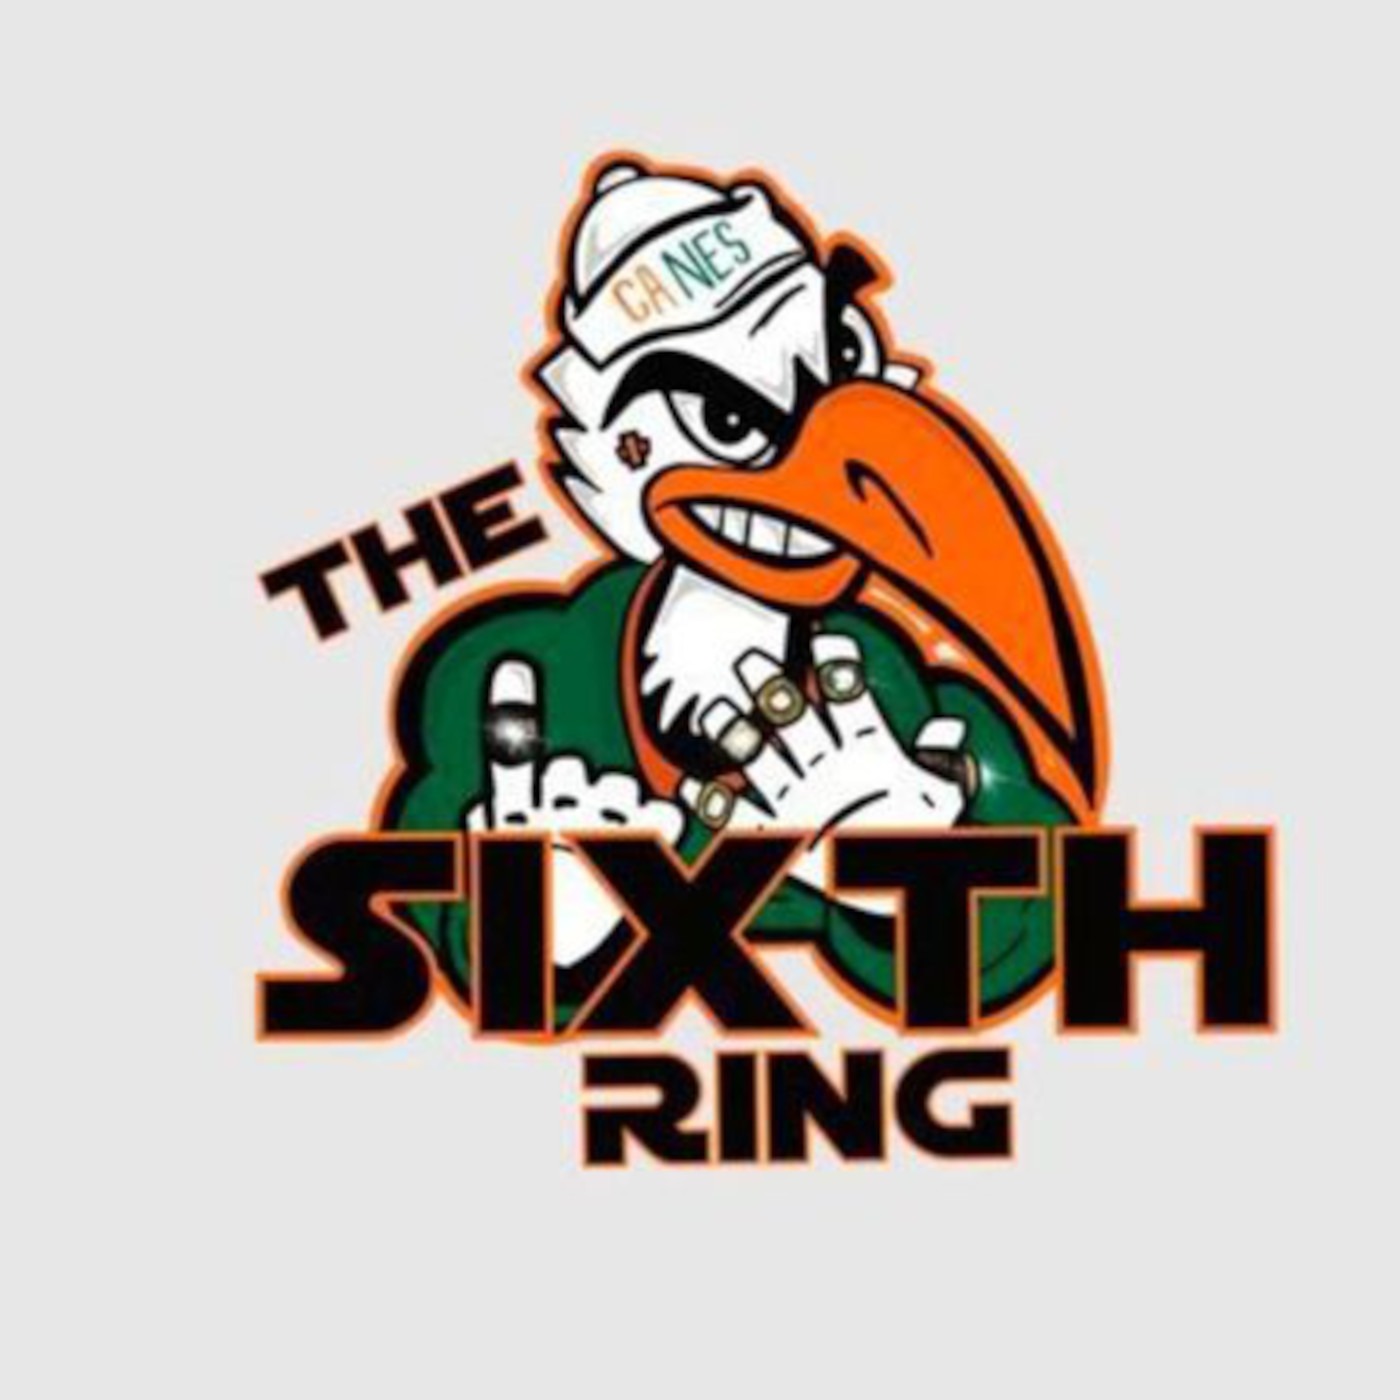 Is it a Spring Game without Fans? | Sixth Ring Canes